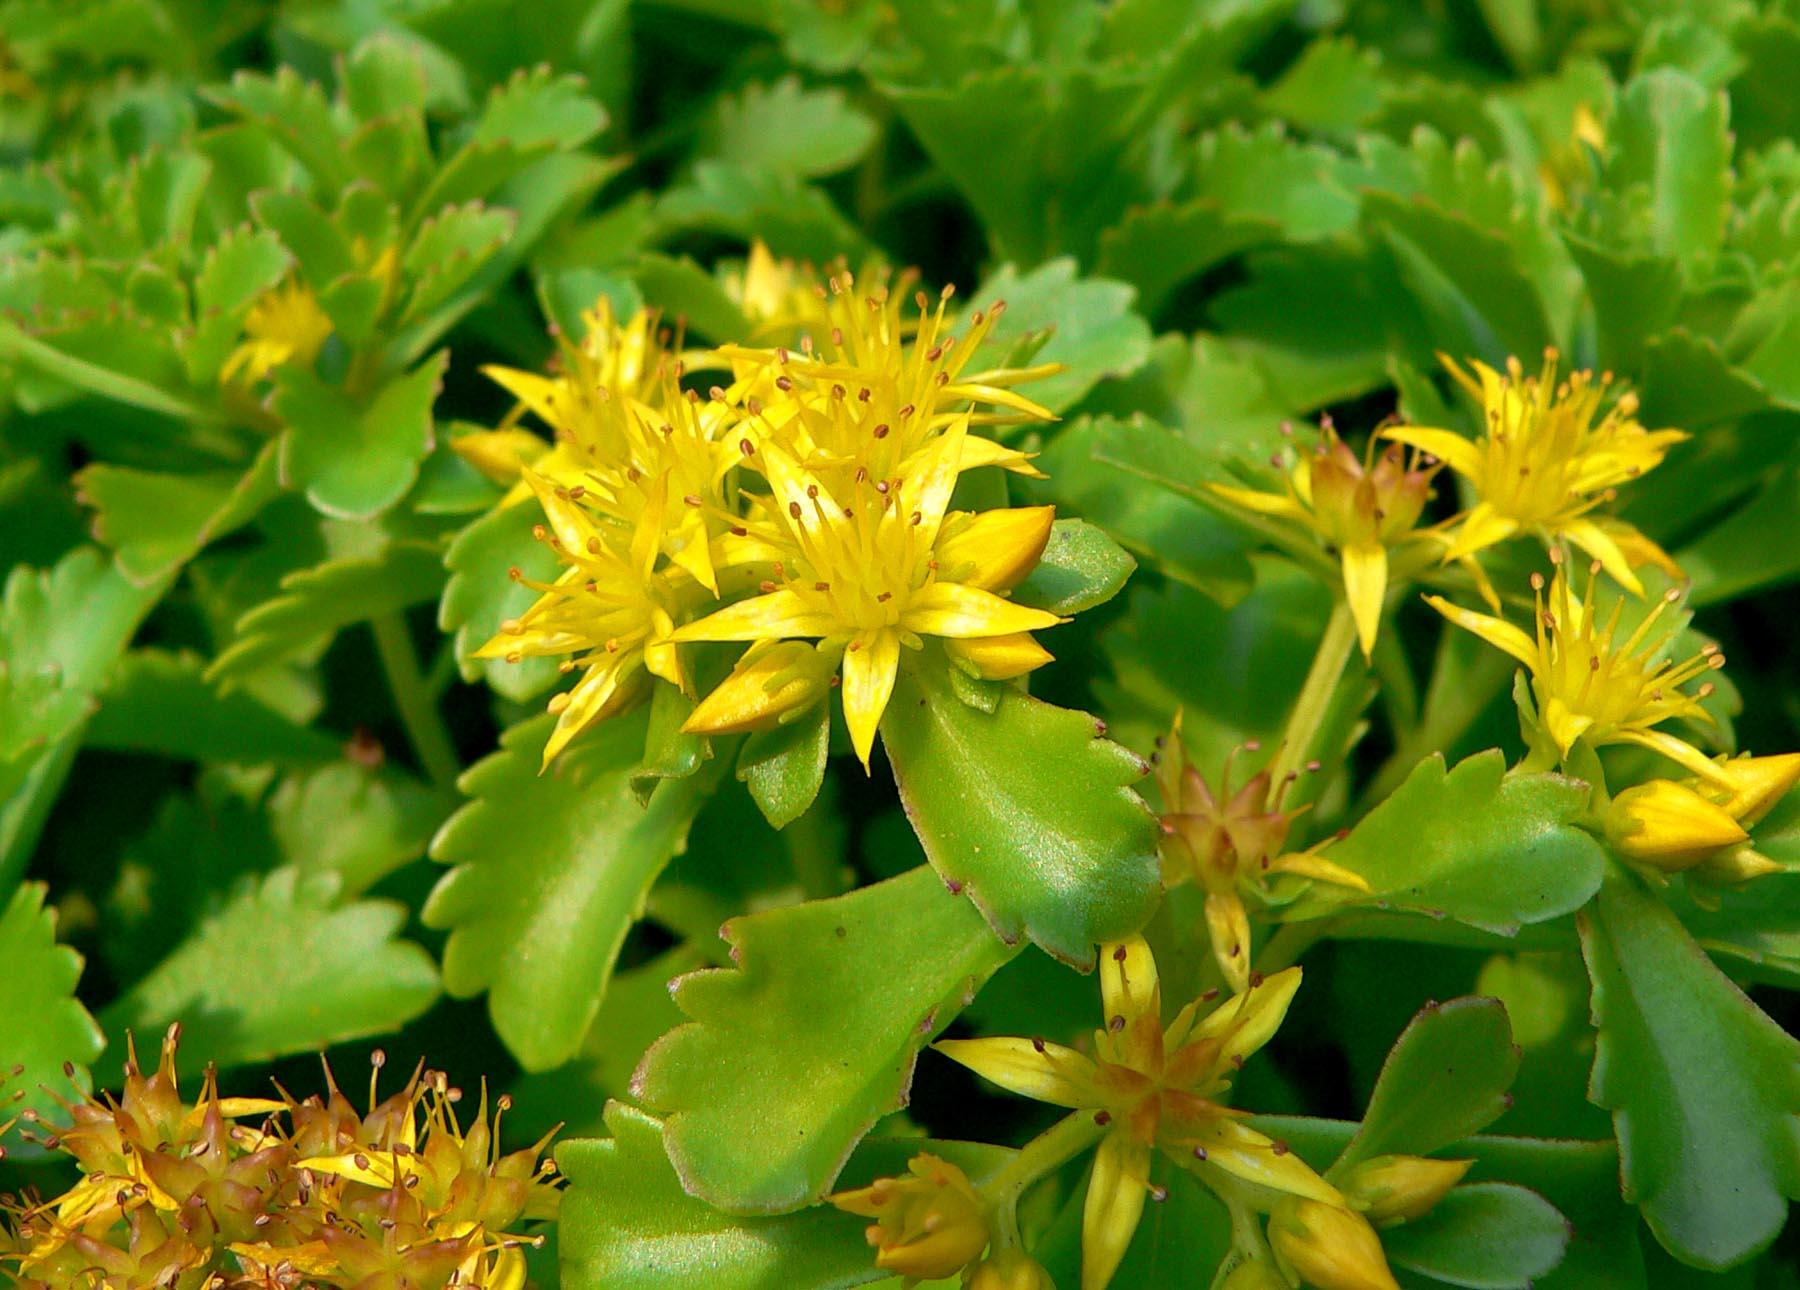 yellow flowers with yellow filaments, brown anthers, lime leaves and stems
